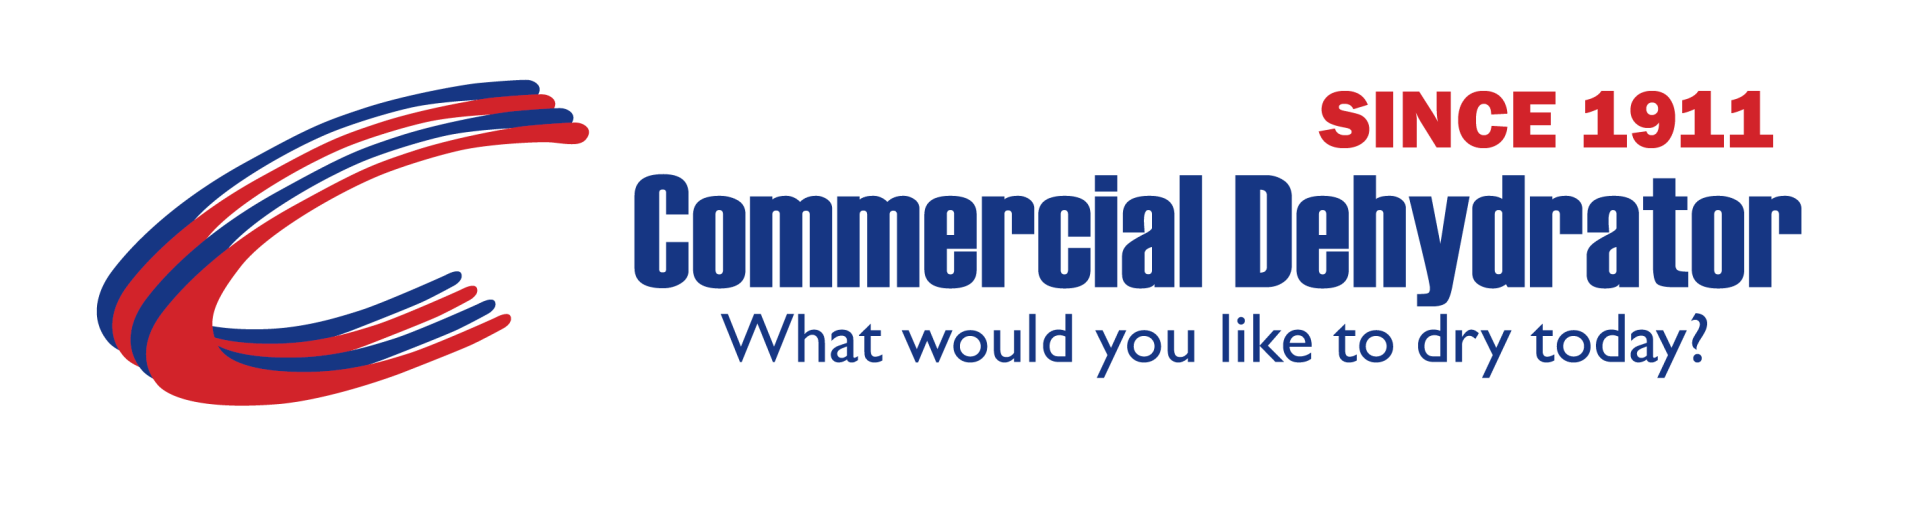 Commercial Dehydrator Systems Inc. since 1911